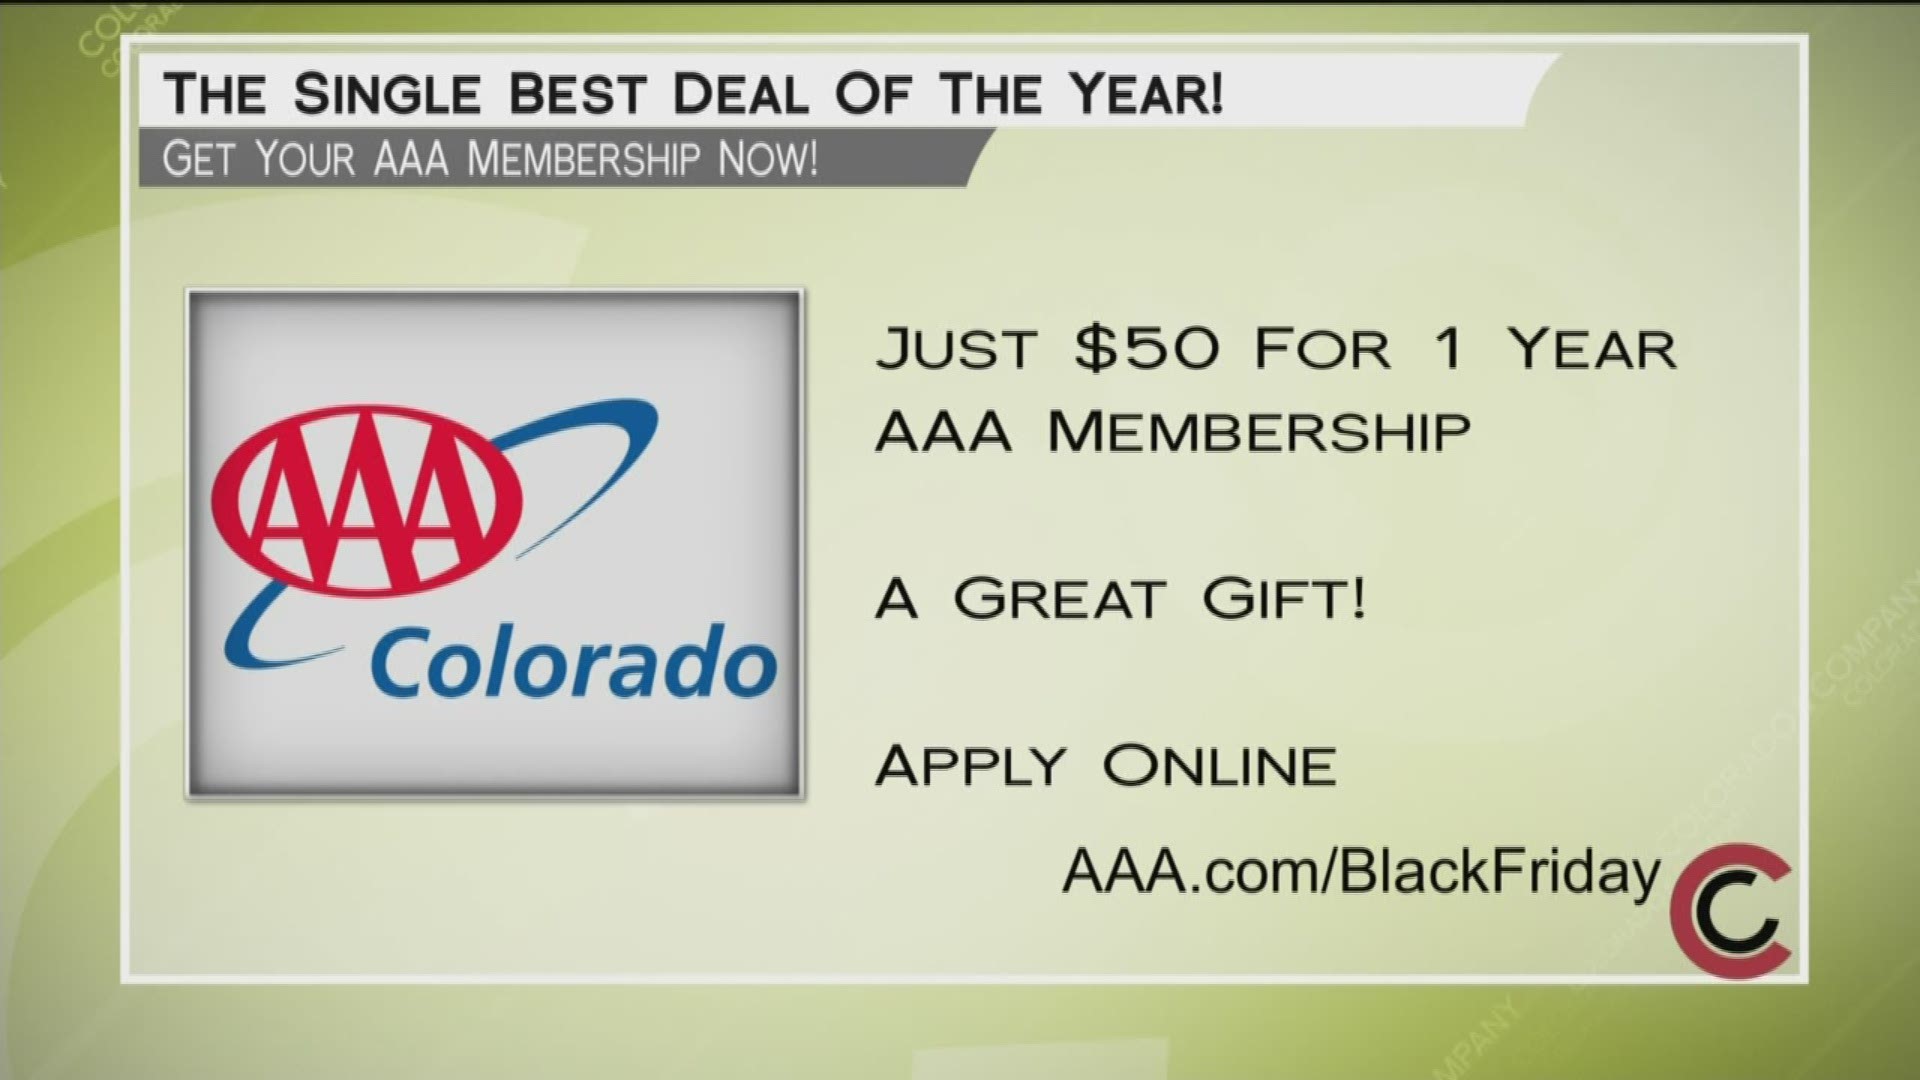 Take advantage of a great deal on AAA membership—just $50 for an entire year! Learn more at www.AAA.com/BlackFriday.